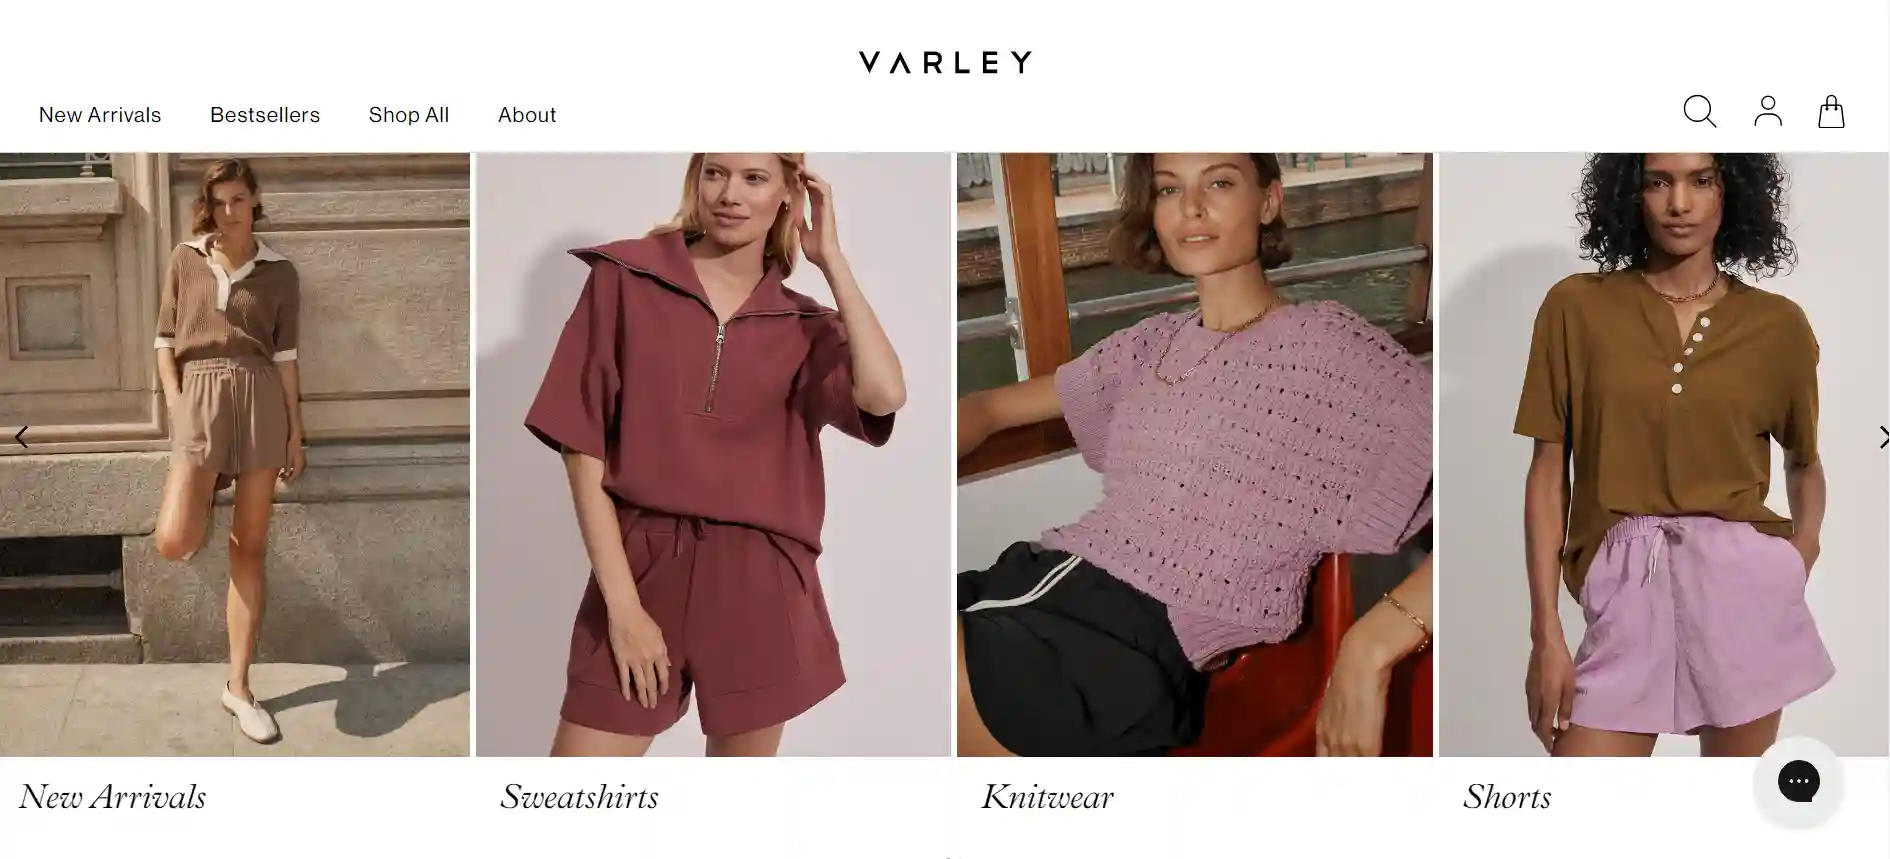 You are currently viewing Varley Clothing Reviews: Should You Give It a Try?